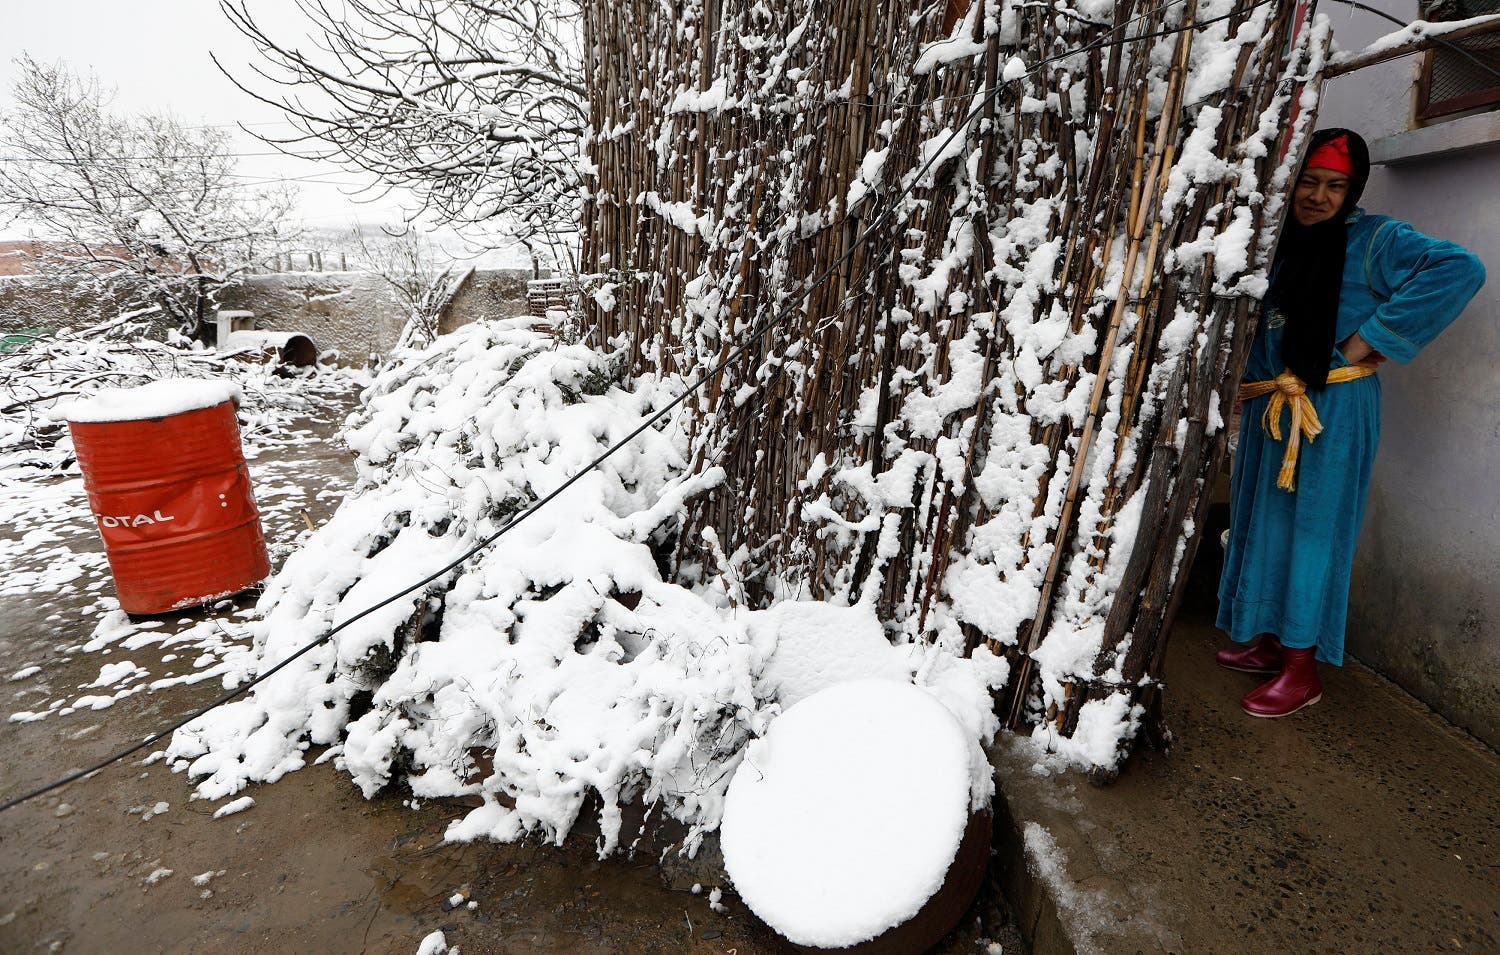 A woman stands outside her house after a snowfall in Wezra, near Medea. (Reuters)